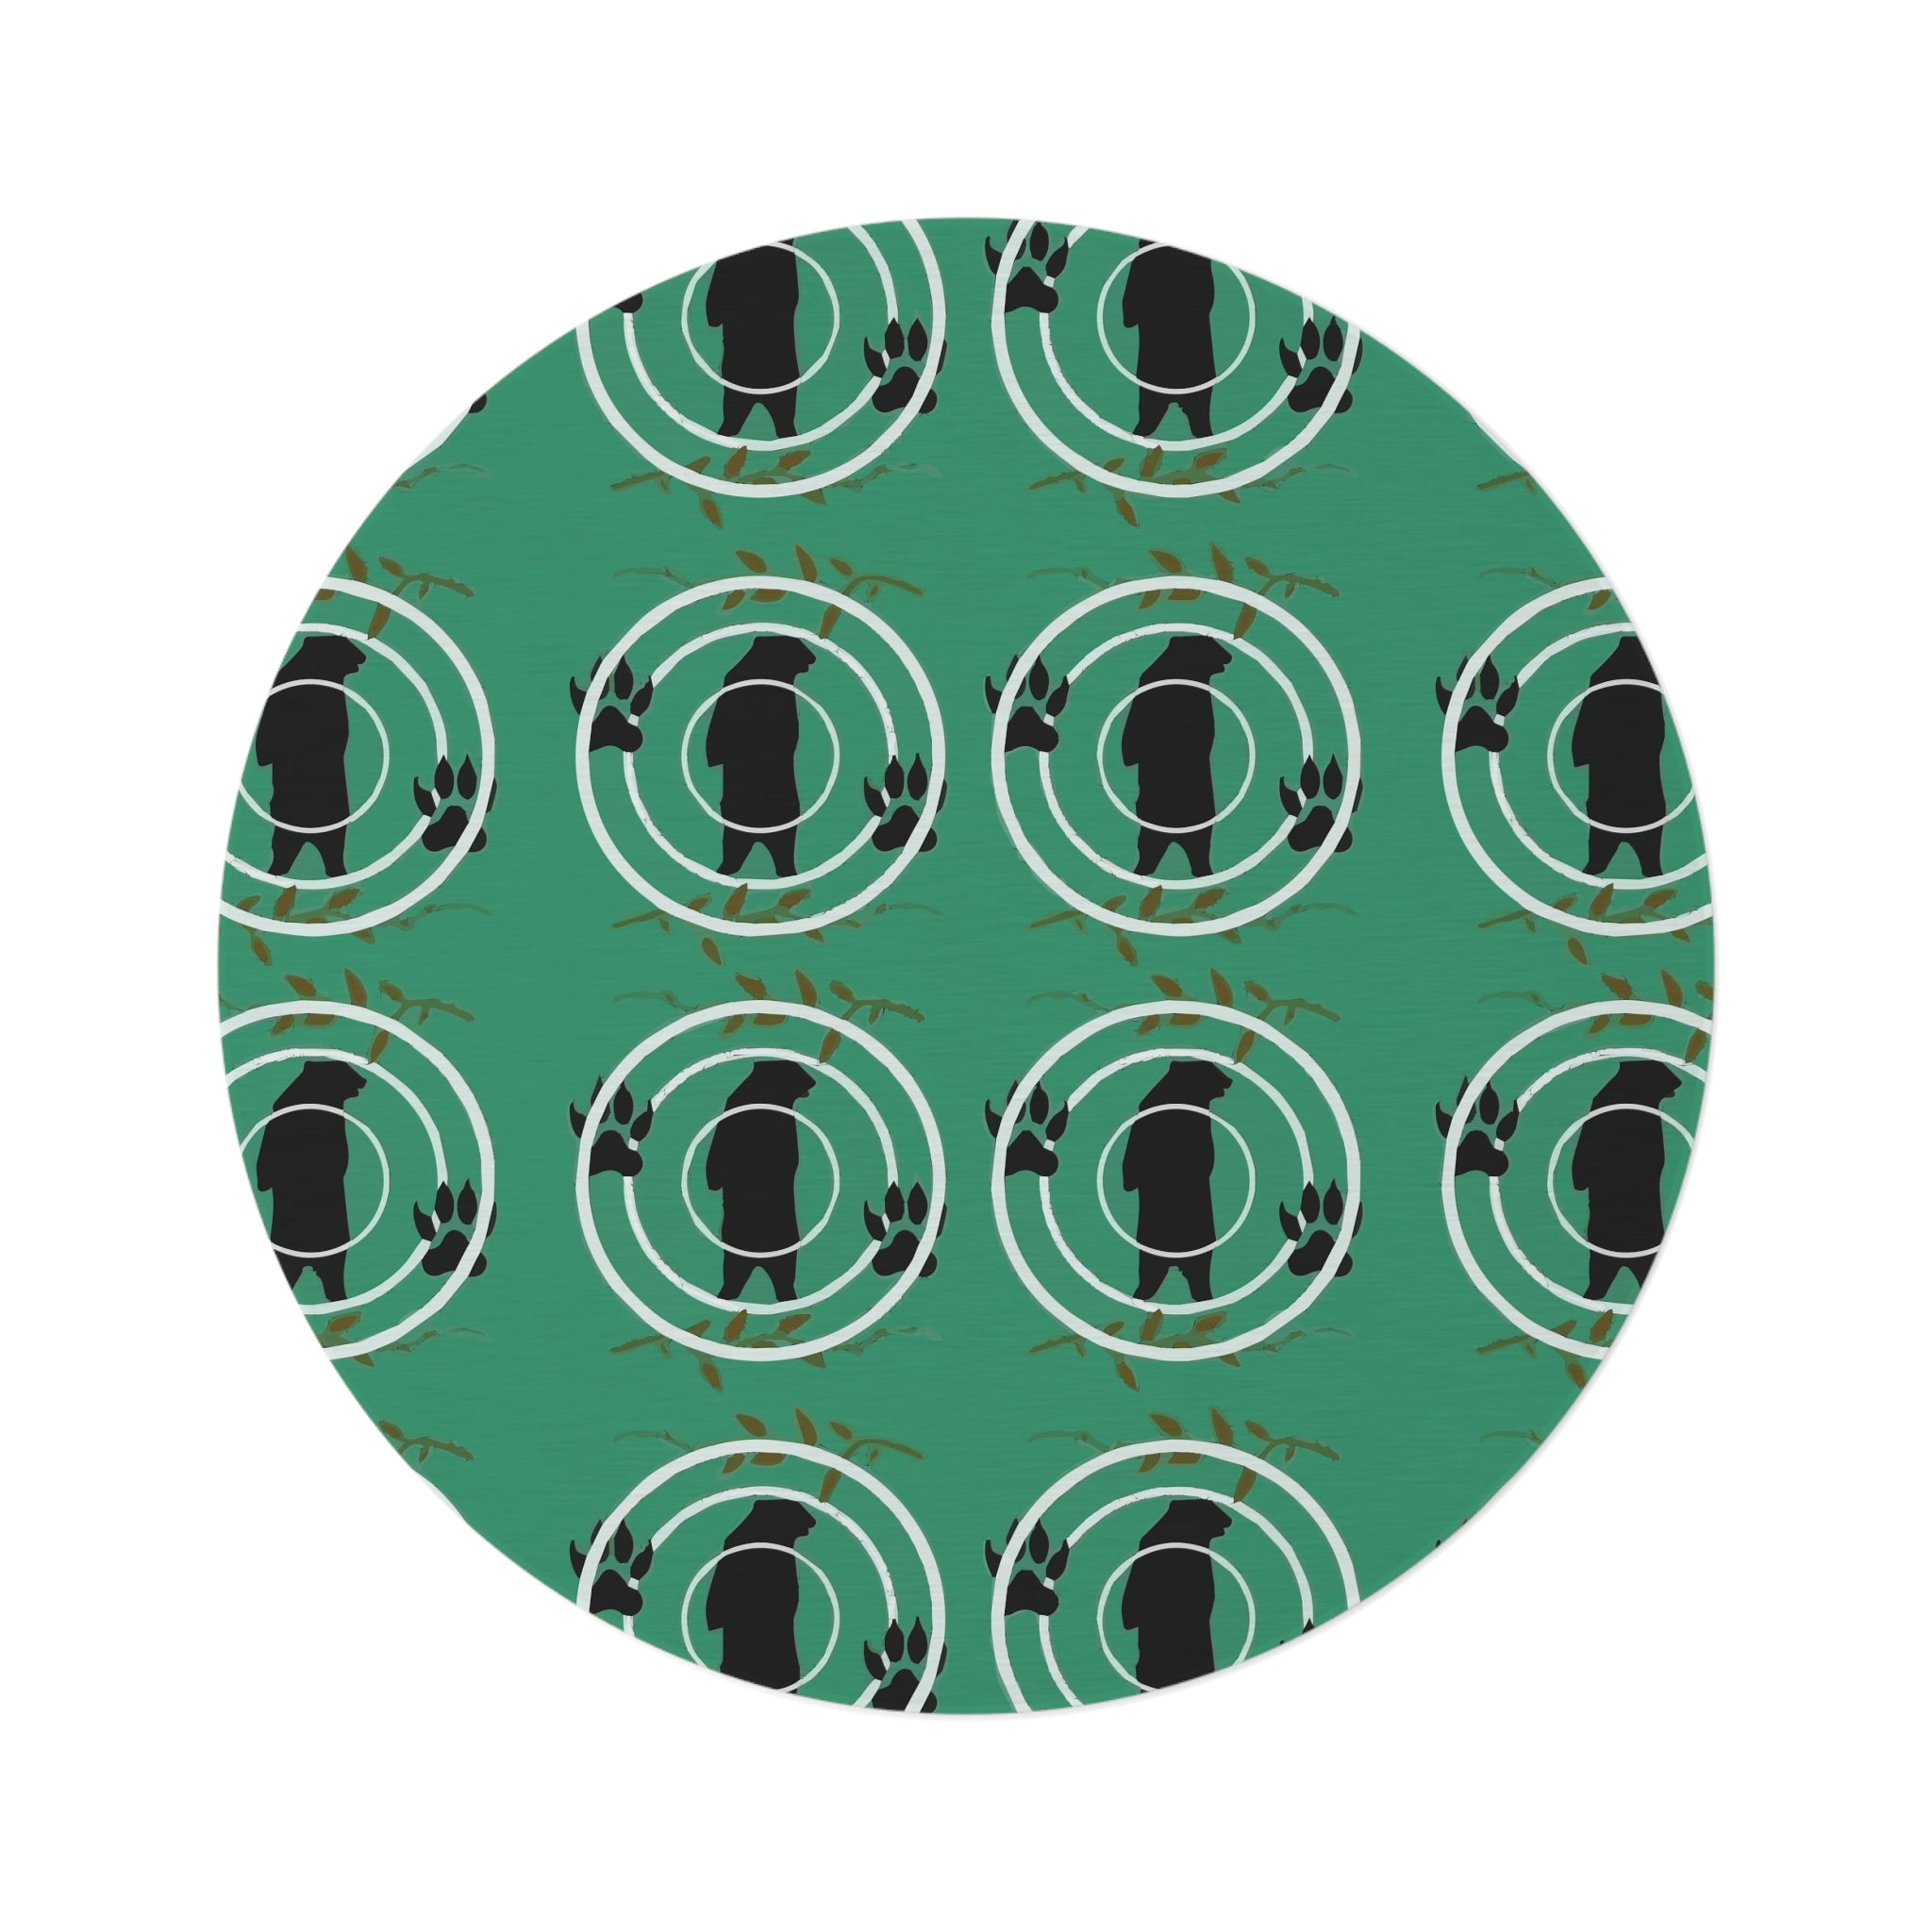 Country Black Bear on Green Round Rug